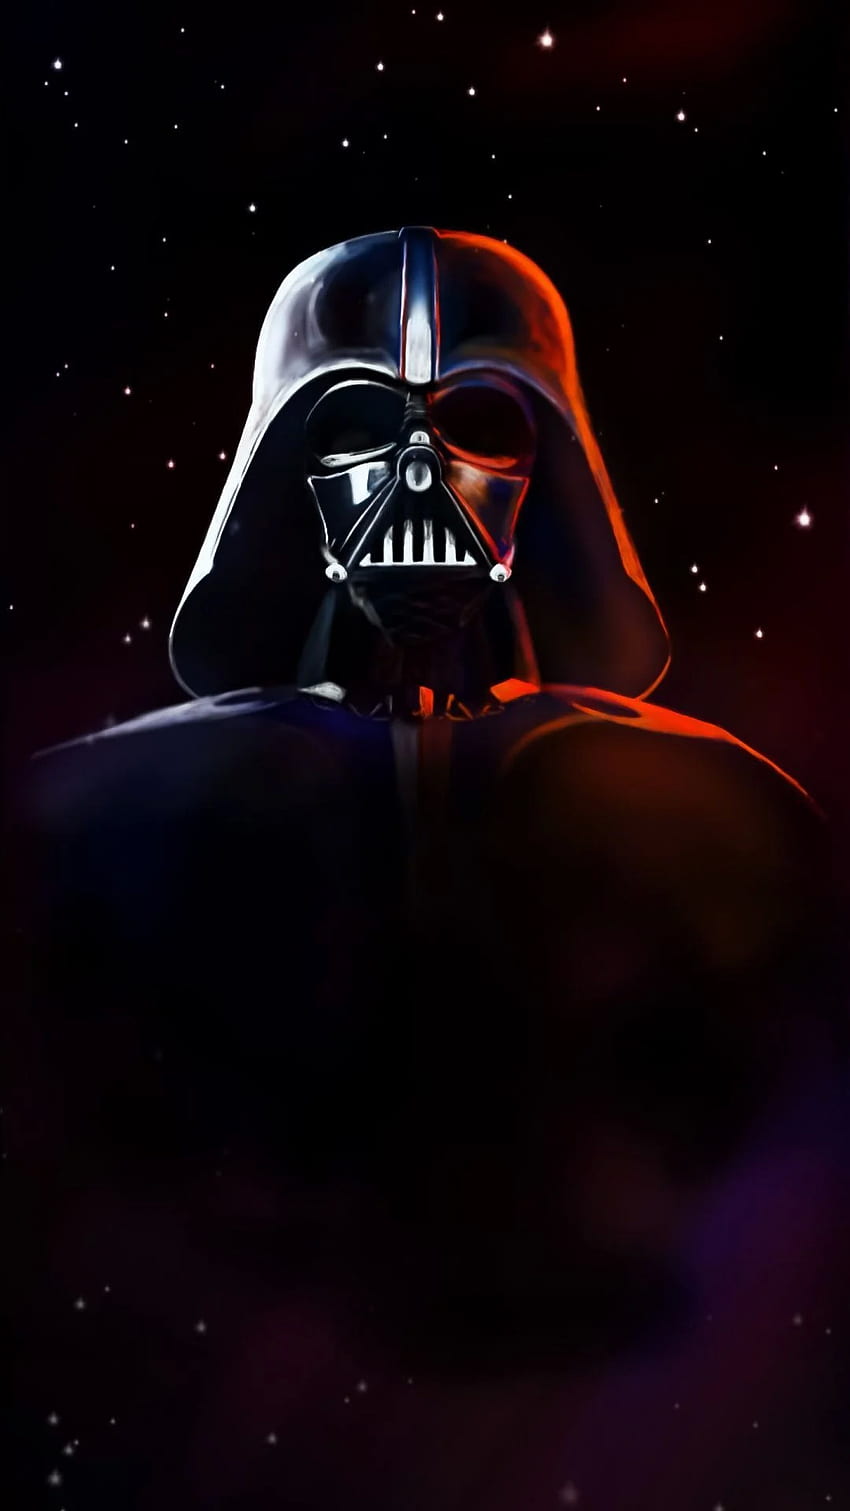 Darth Vader Rogue One Android Background in 2020. Star wars , Darth vader drawing, Darth vader HD 전화 배경 화면